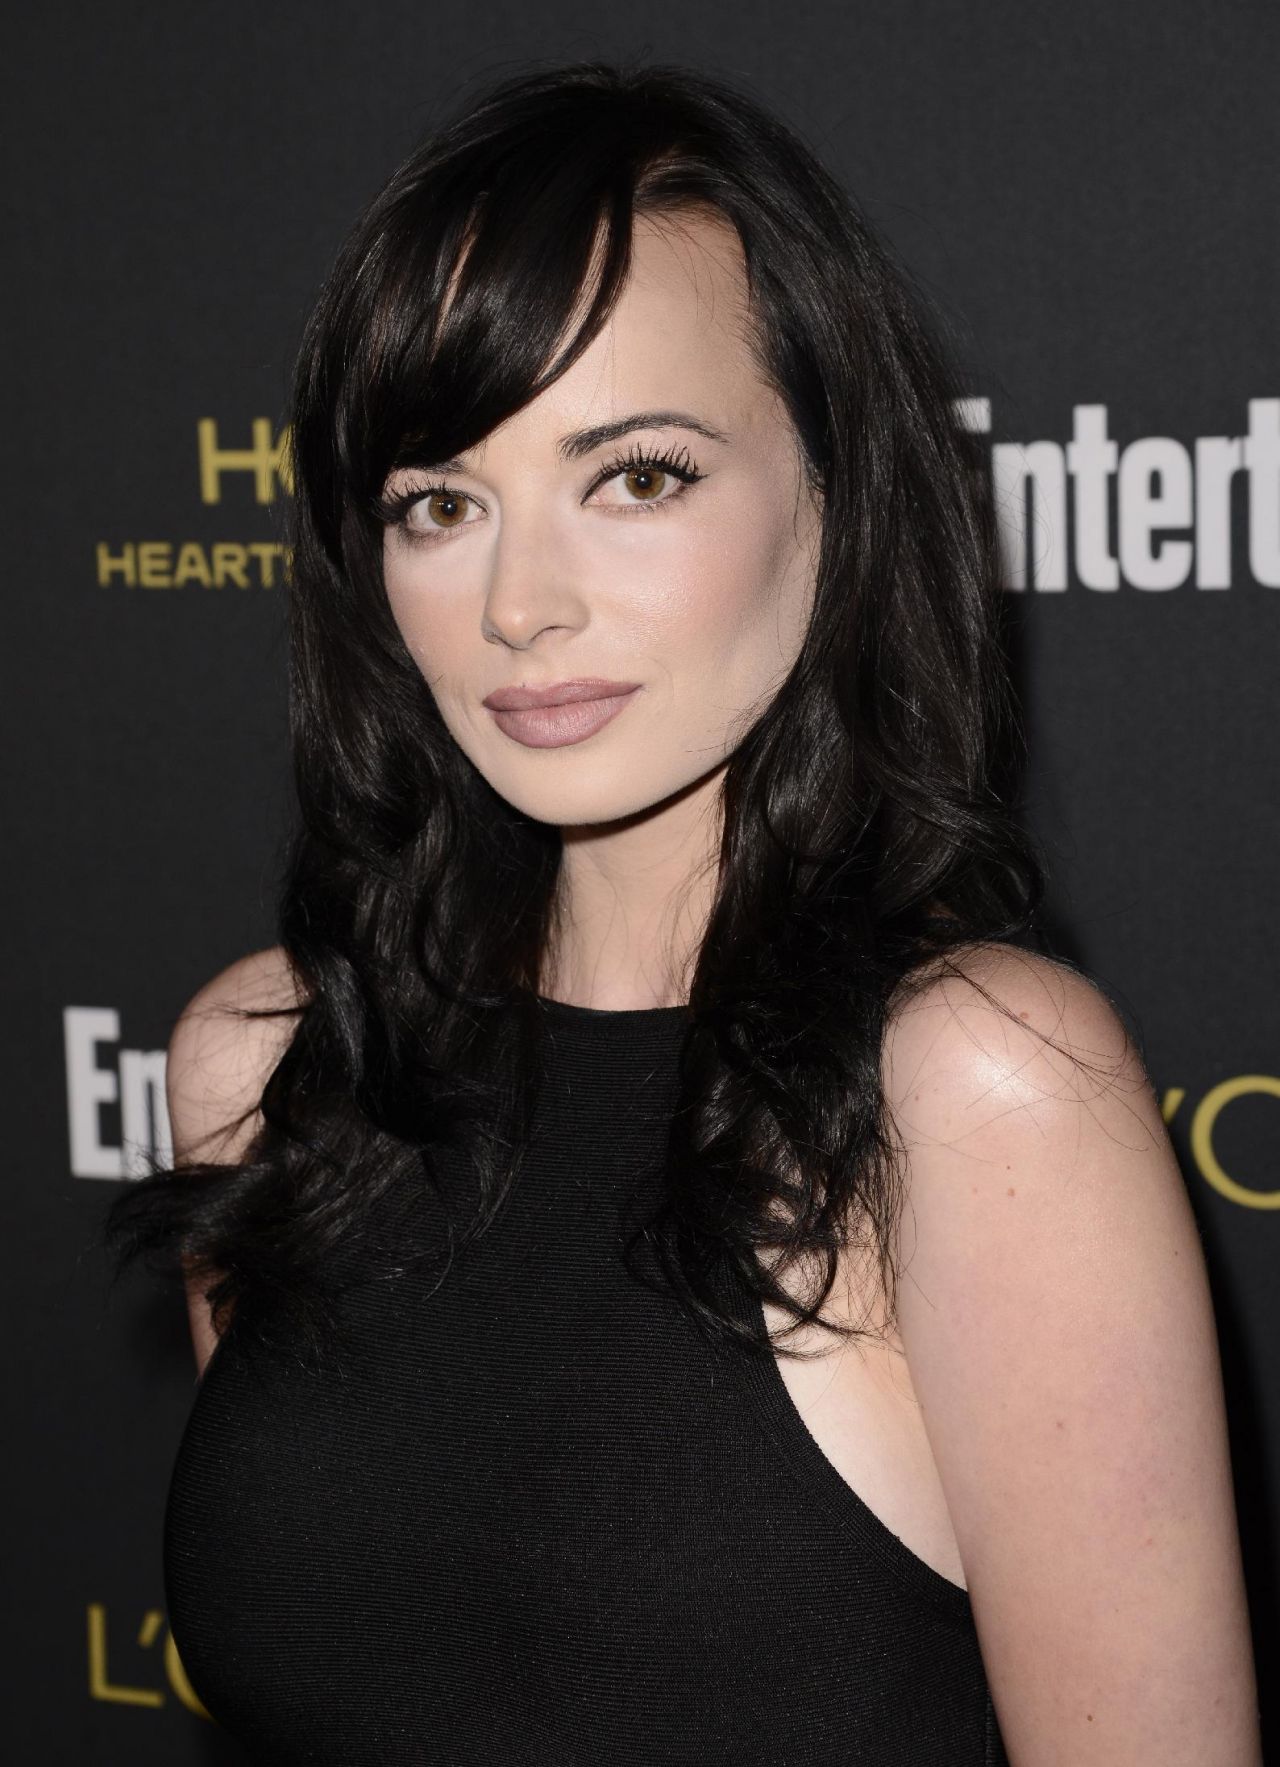 Ashley Rickards – Entertainment Weekly’s Pre-Emmy 2014 Party in West Hollywood